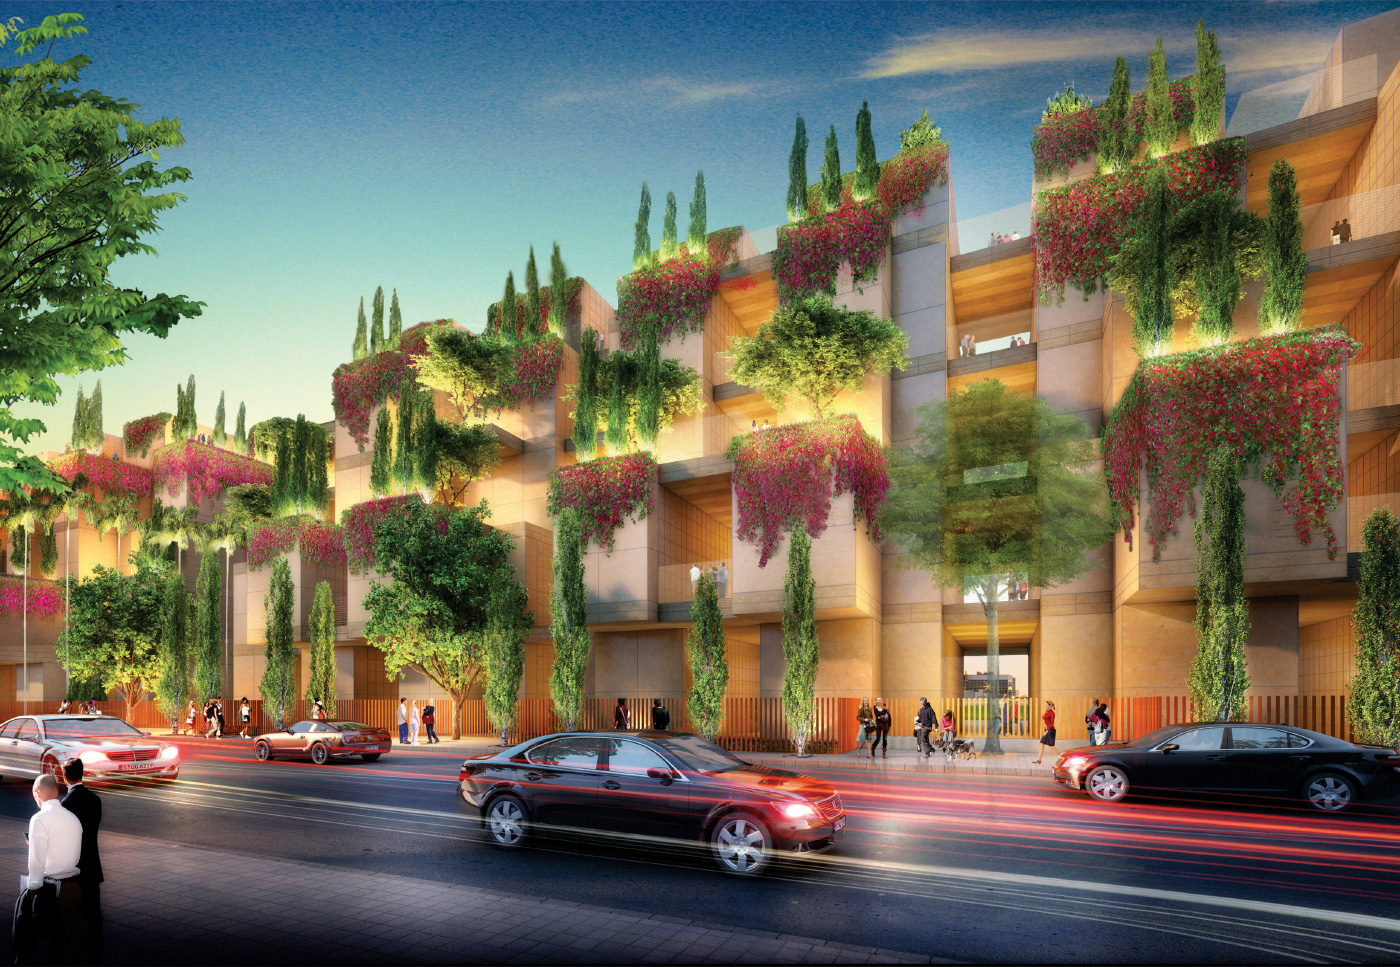 Rendering of a towering addition next to the for Hollywood Forever Cemetery with plants